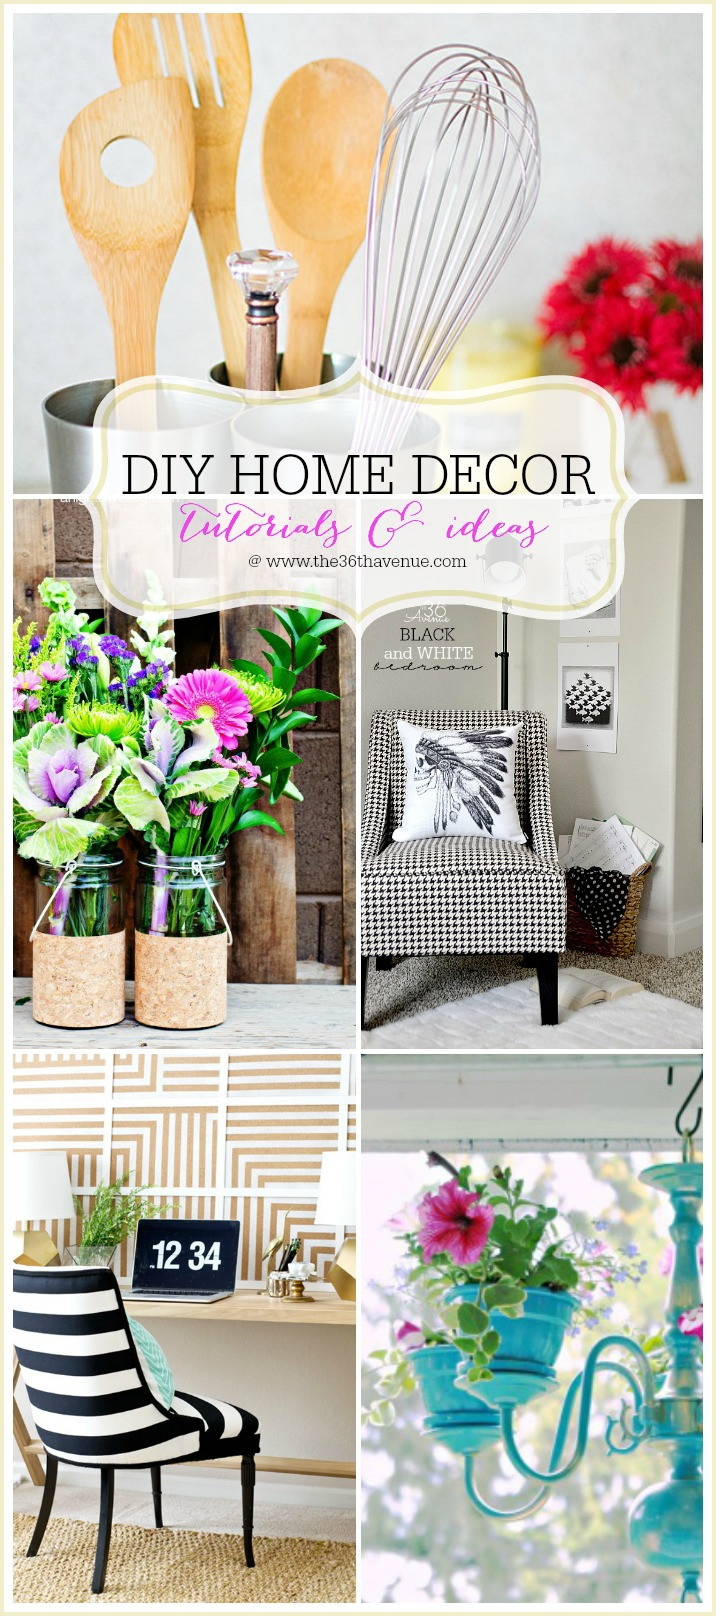 Home Decor DIY
 The 36th AVENUE Home Decor DIY Projects